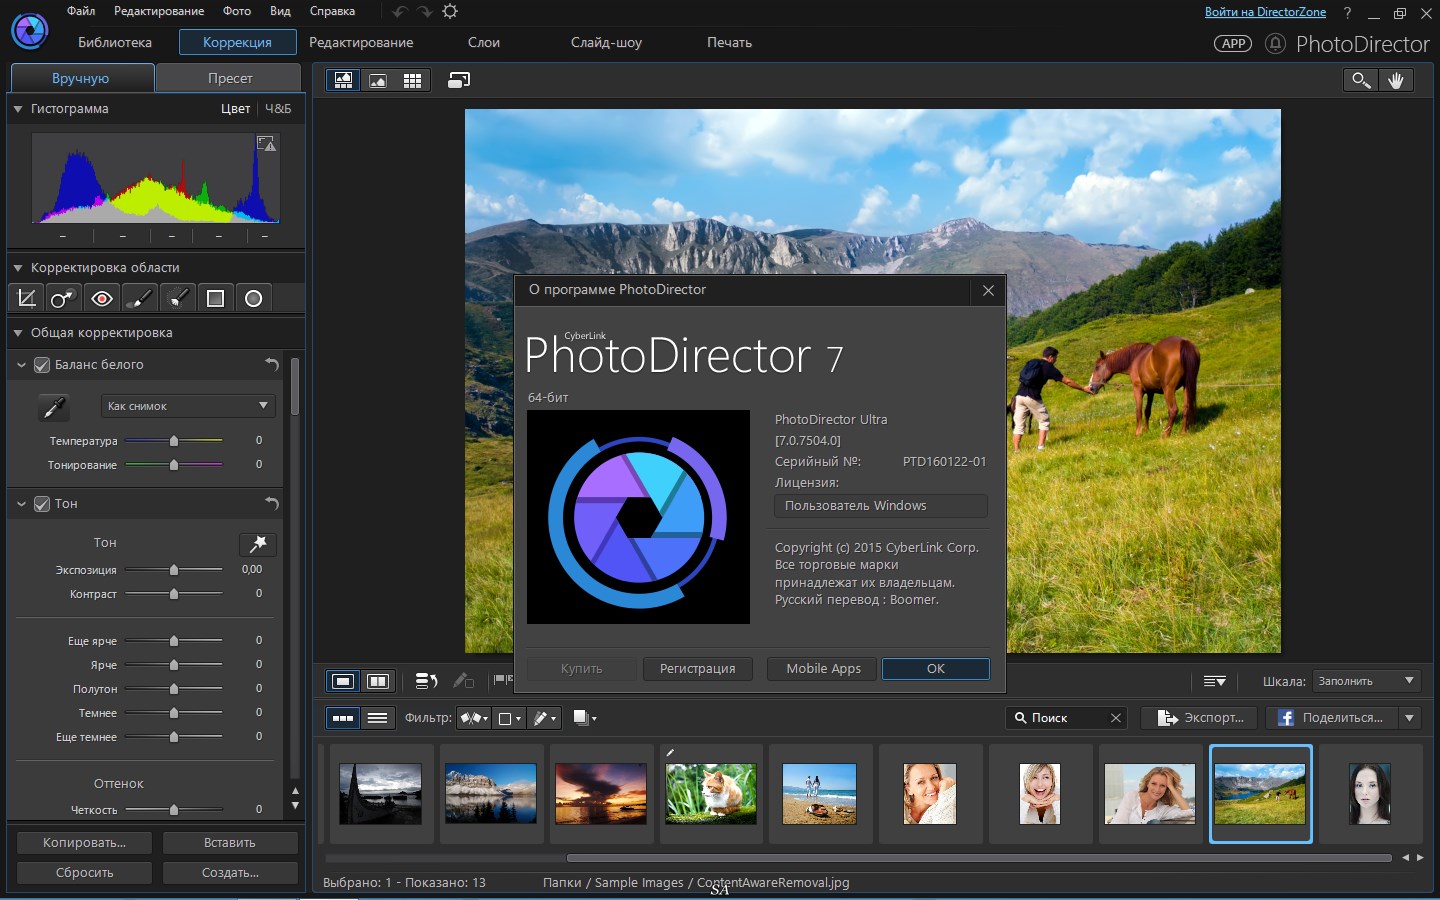 CyberLink PhotoDirector Ultra 15.0.1205.0 for apple download free